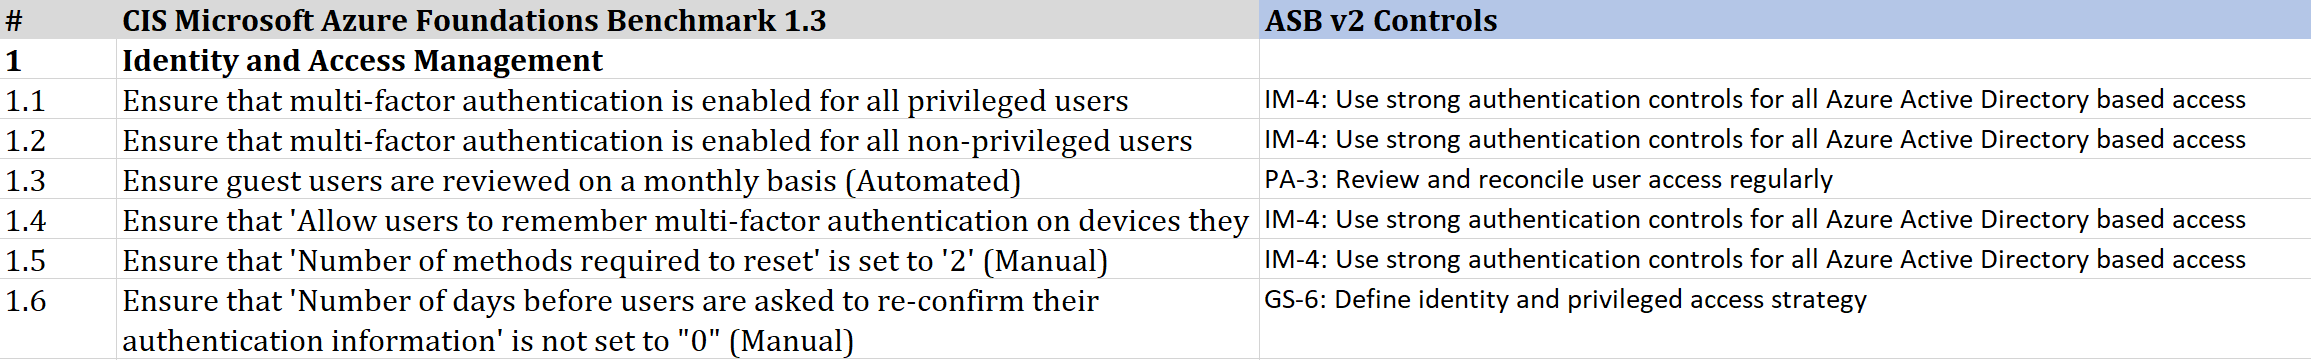 Mapping between ASB and CIS Benchmark